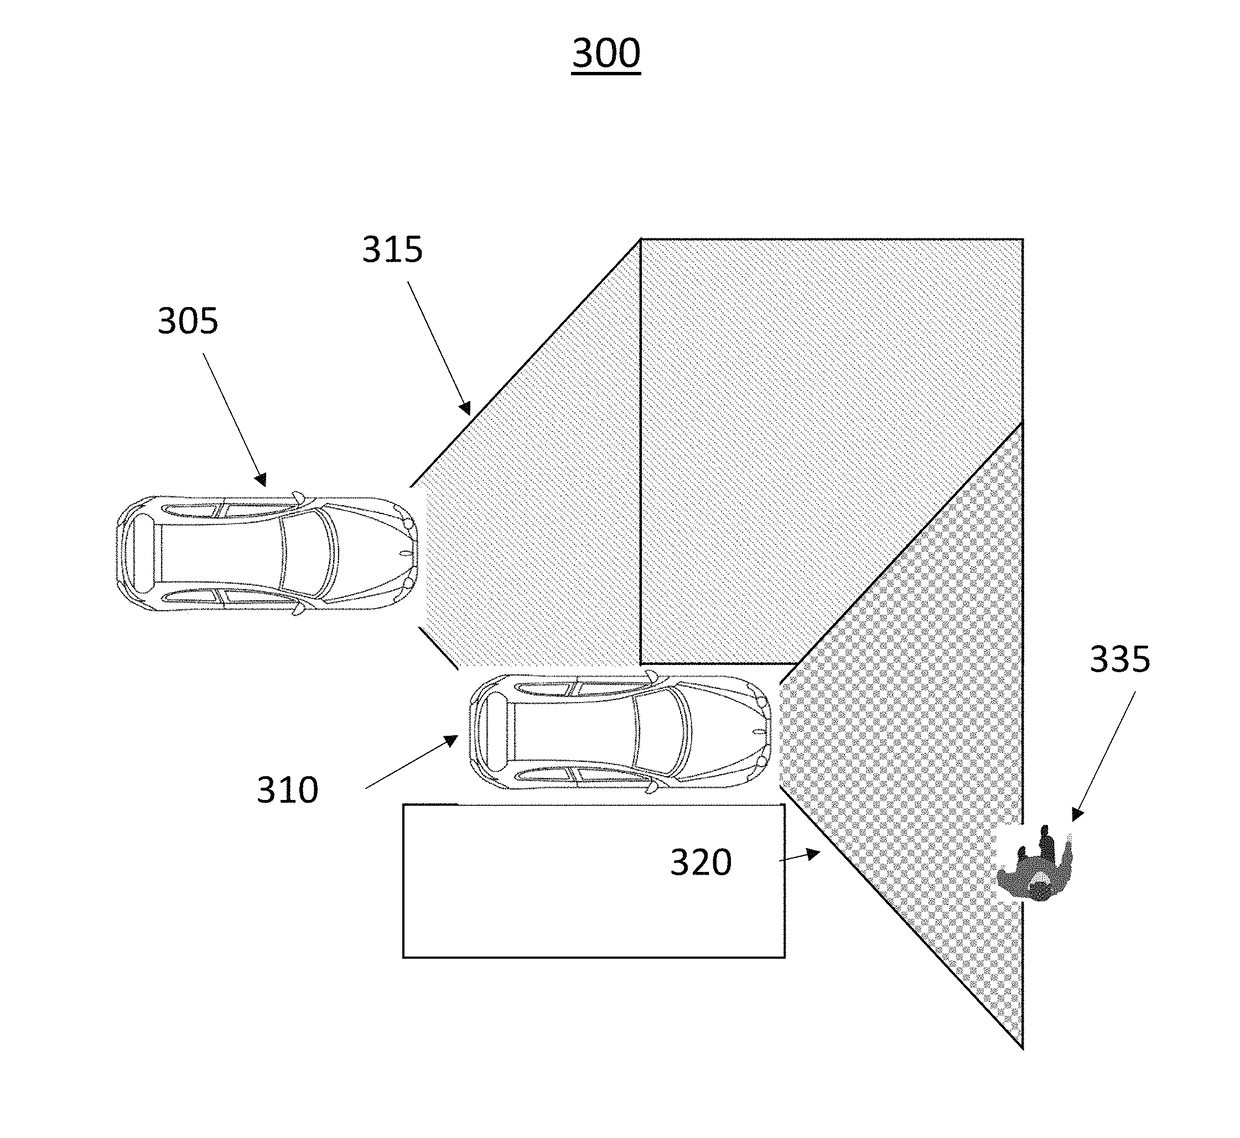 Method and apparatus of networked scene rendering and augmentation in vehicular environments in autonomous driving systems